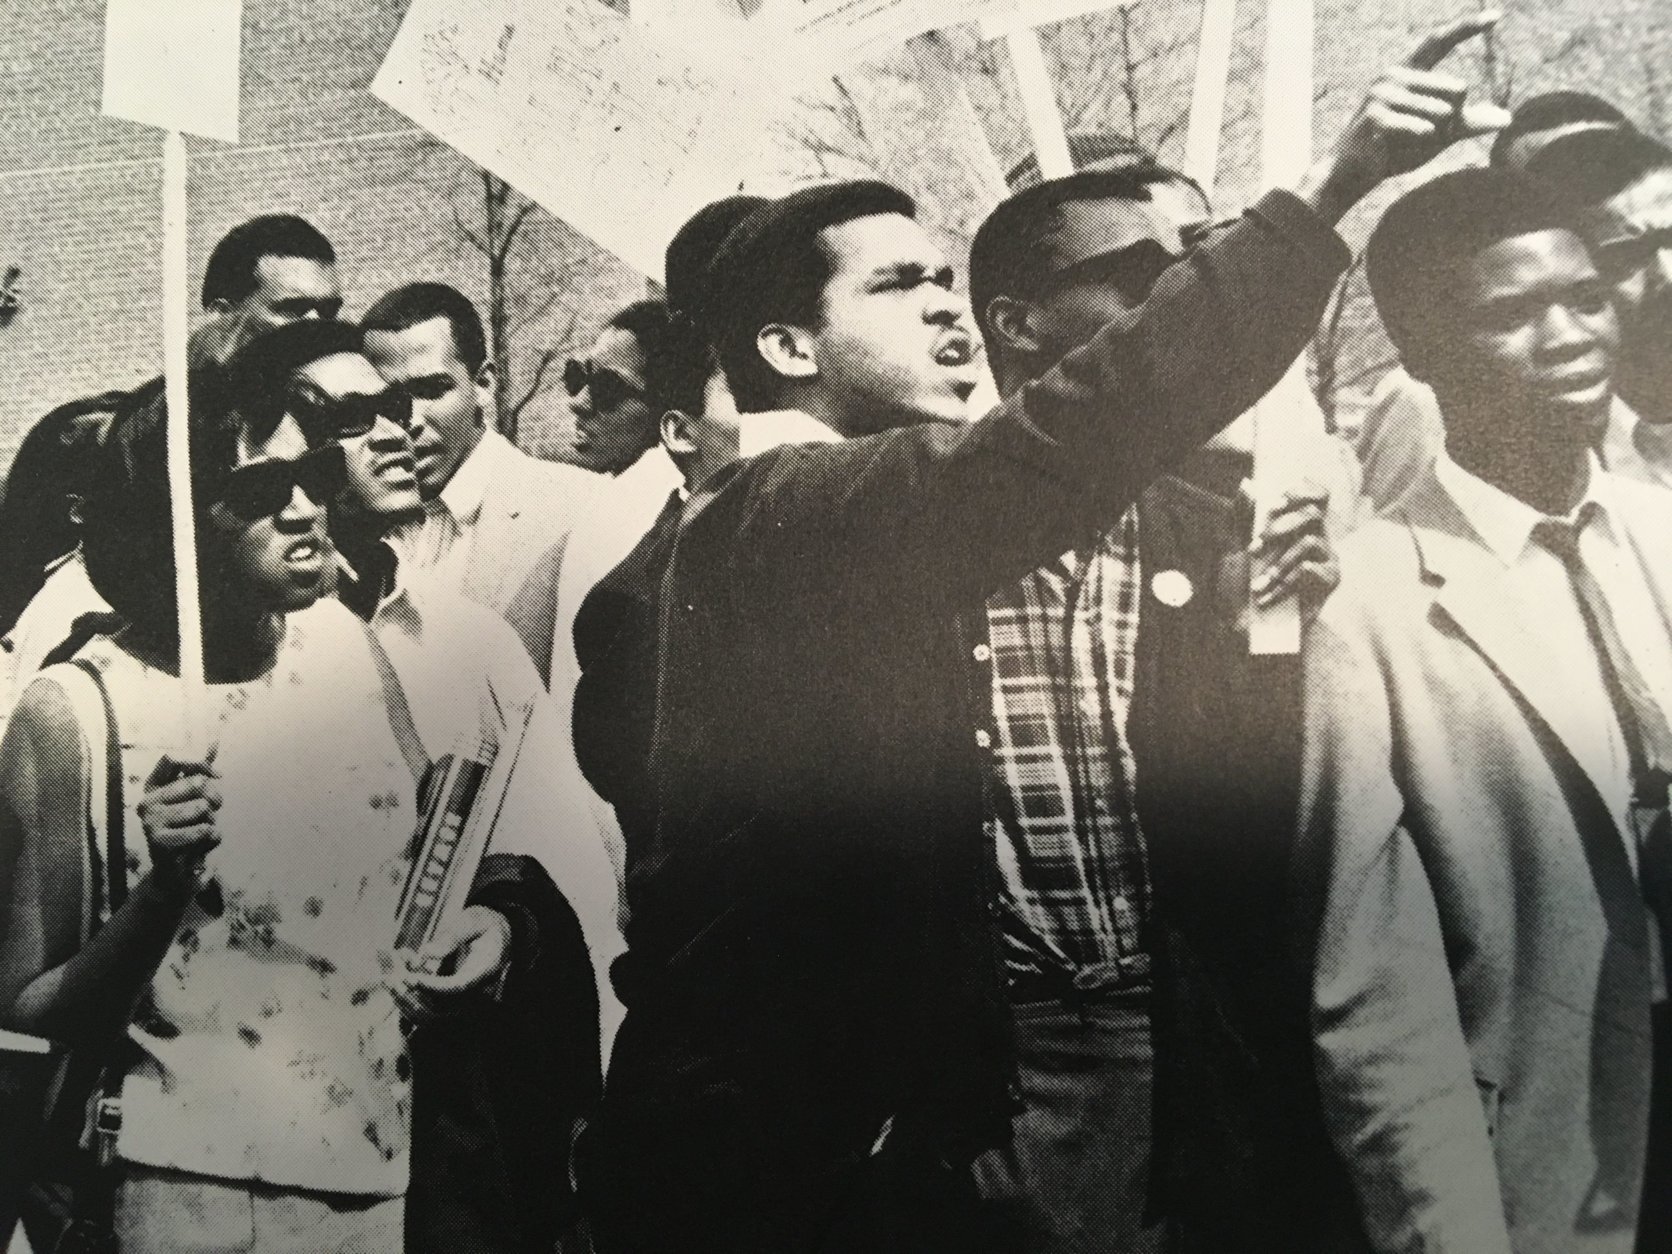 Students rally during the shutdown at Howard University in 1968. Anthony Gittens is nearest the camera. (Courtesy Anthony Gittens)